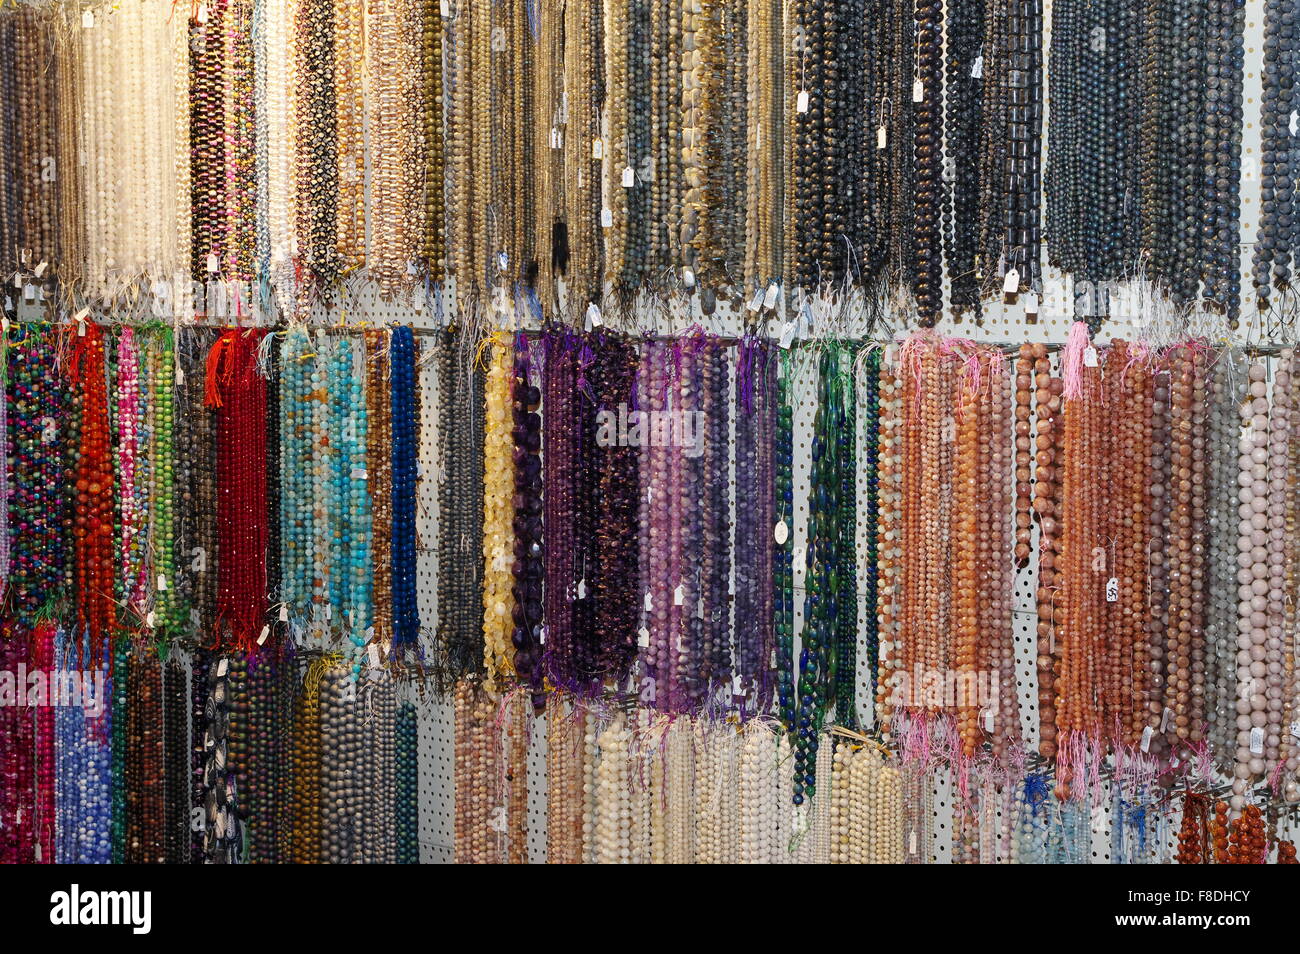 Beads made of semiprecious stones hanging on display at a market stall. Stock Photo